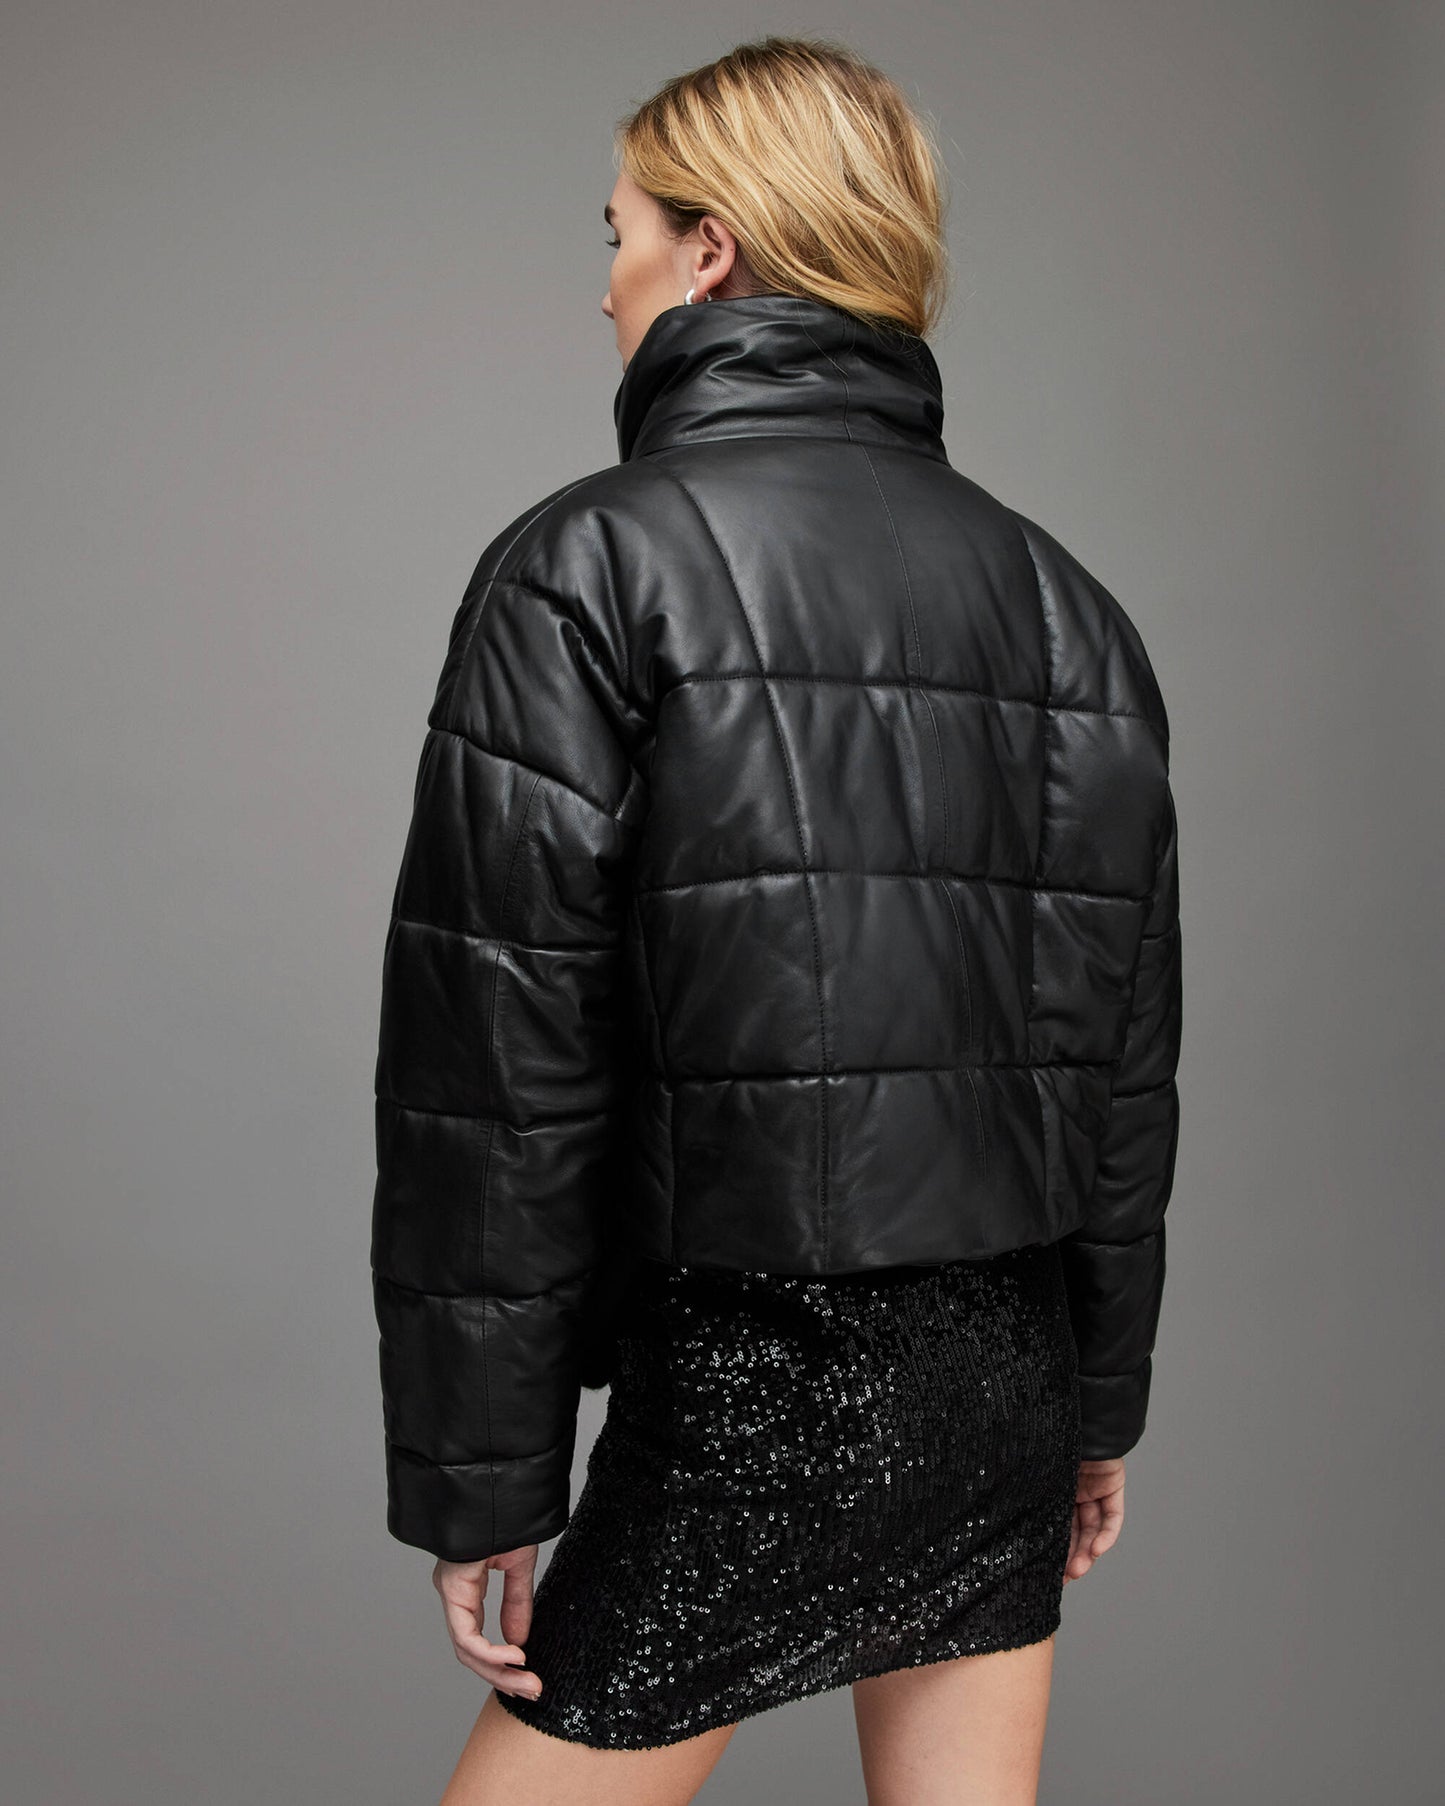 Women's Black Puffer Leather Jacket With Turtle Neck